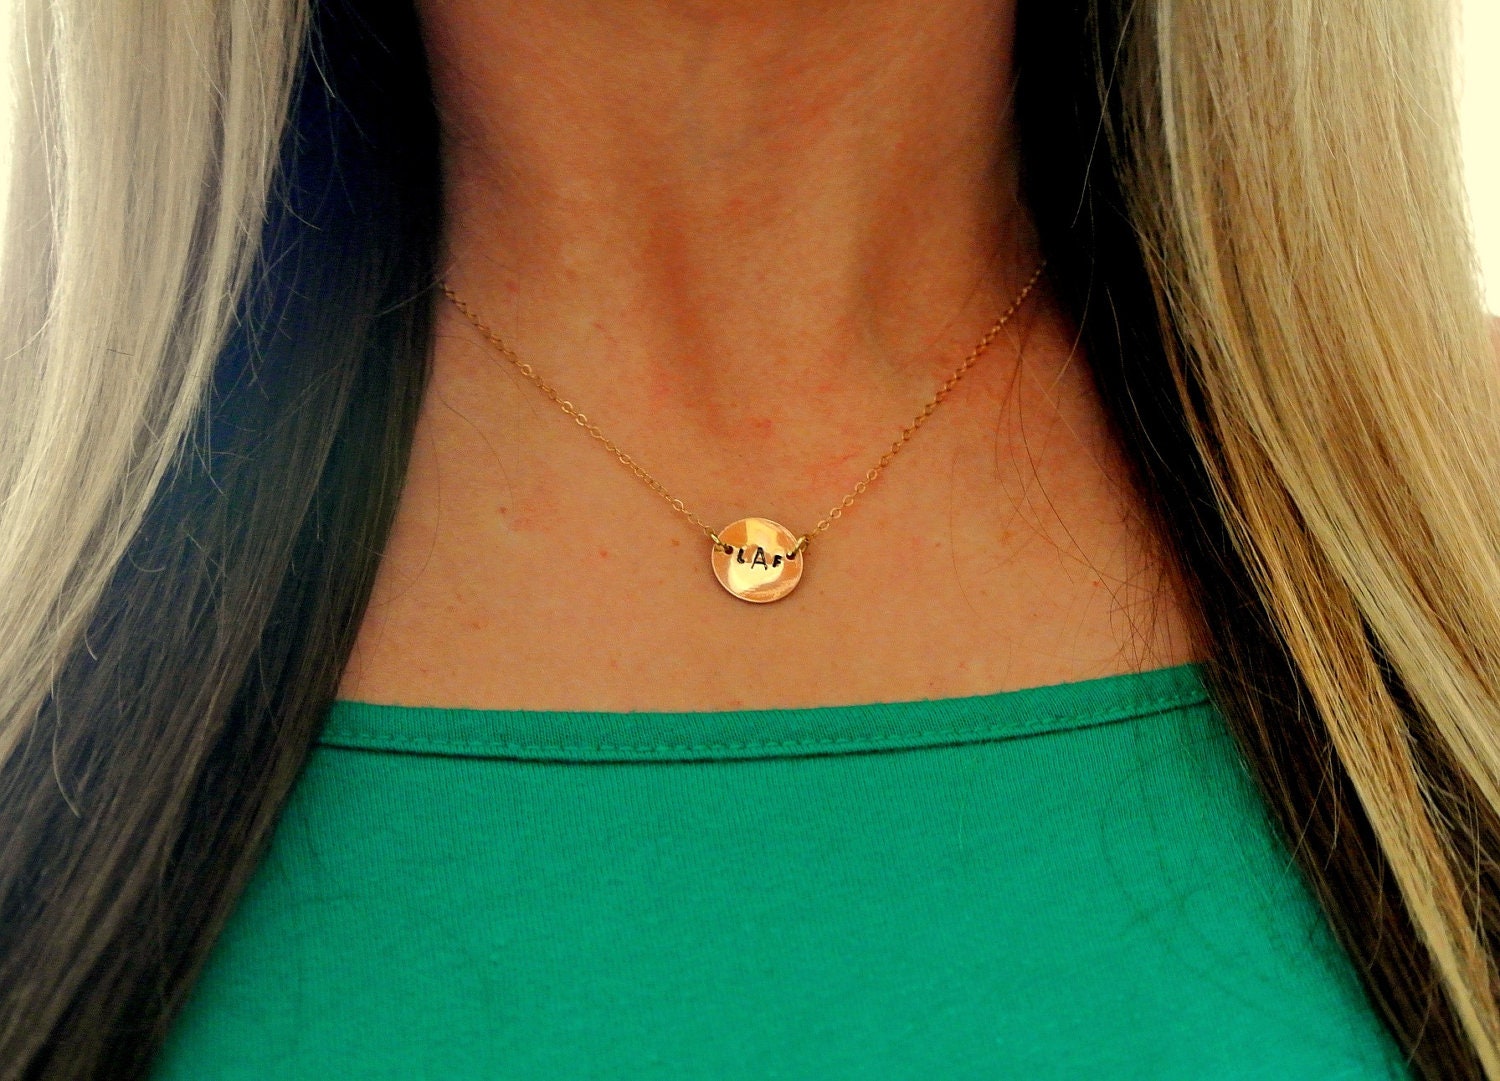 MONOGRAM DISC - Sterling Silver OR Gold-Filled - Personalized Necklace  - Initial Circle Necklace - Monogram Necklace - Minimalist Necklace